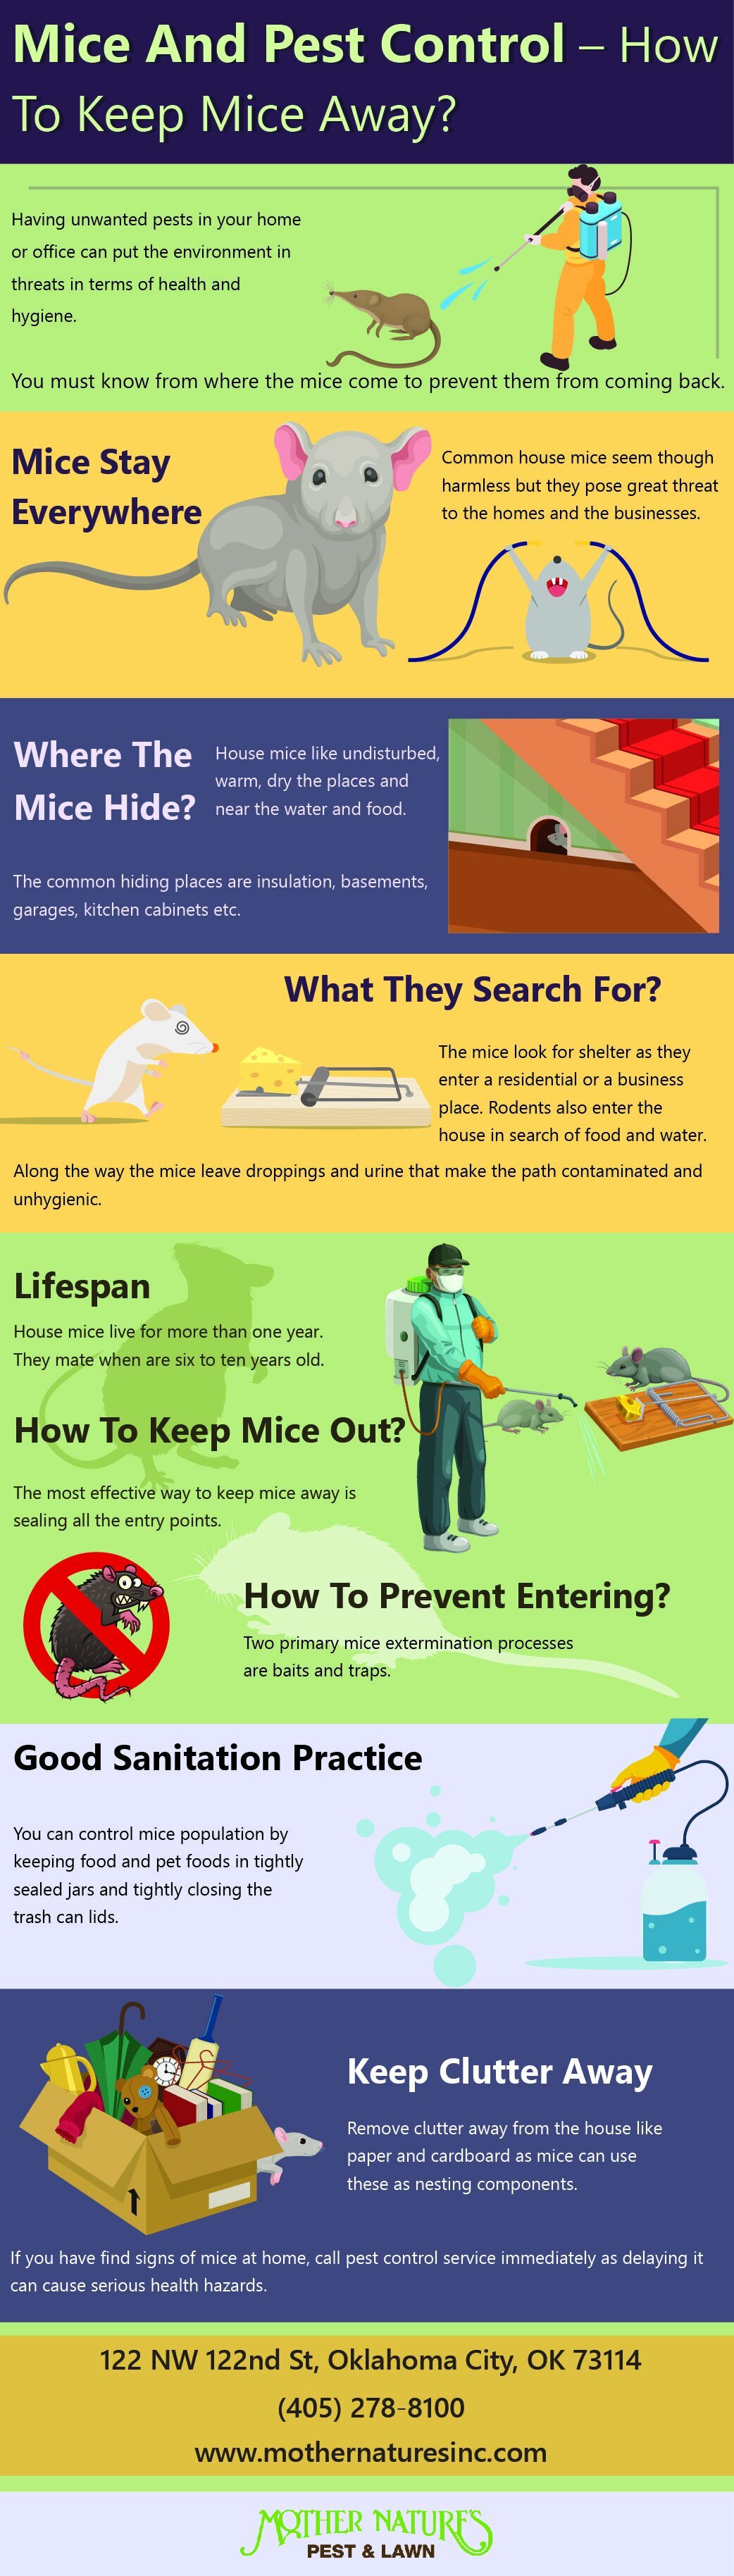 Mice and Pest Control- How to Keep Mice Away? — Mother Nature's Pest & Lawn